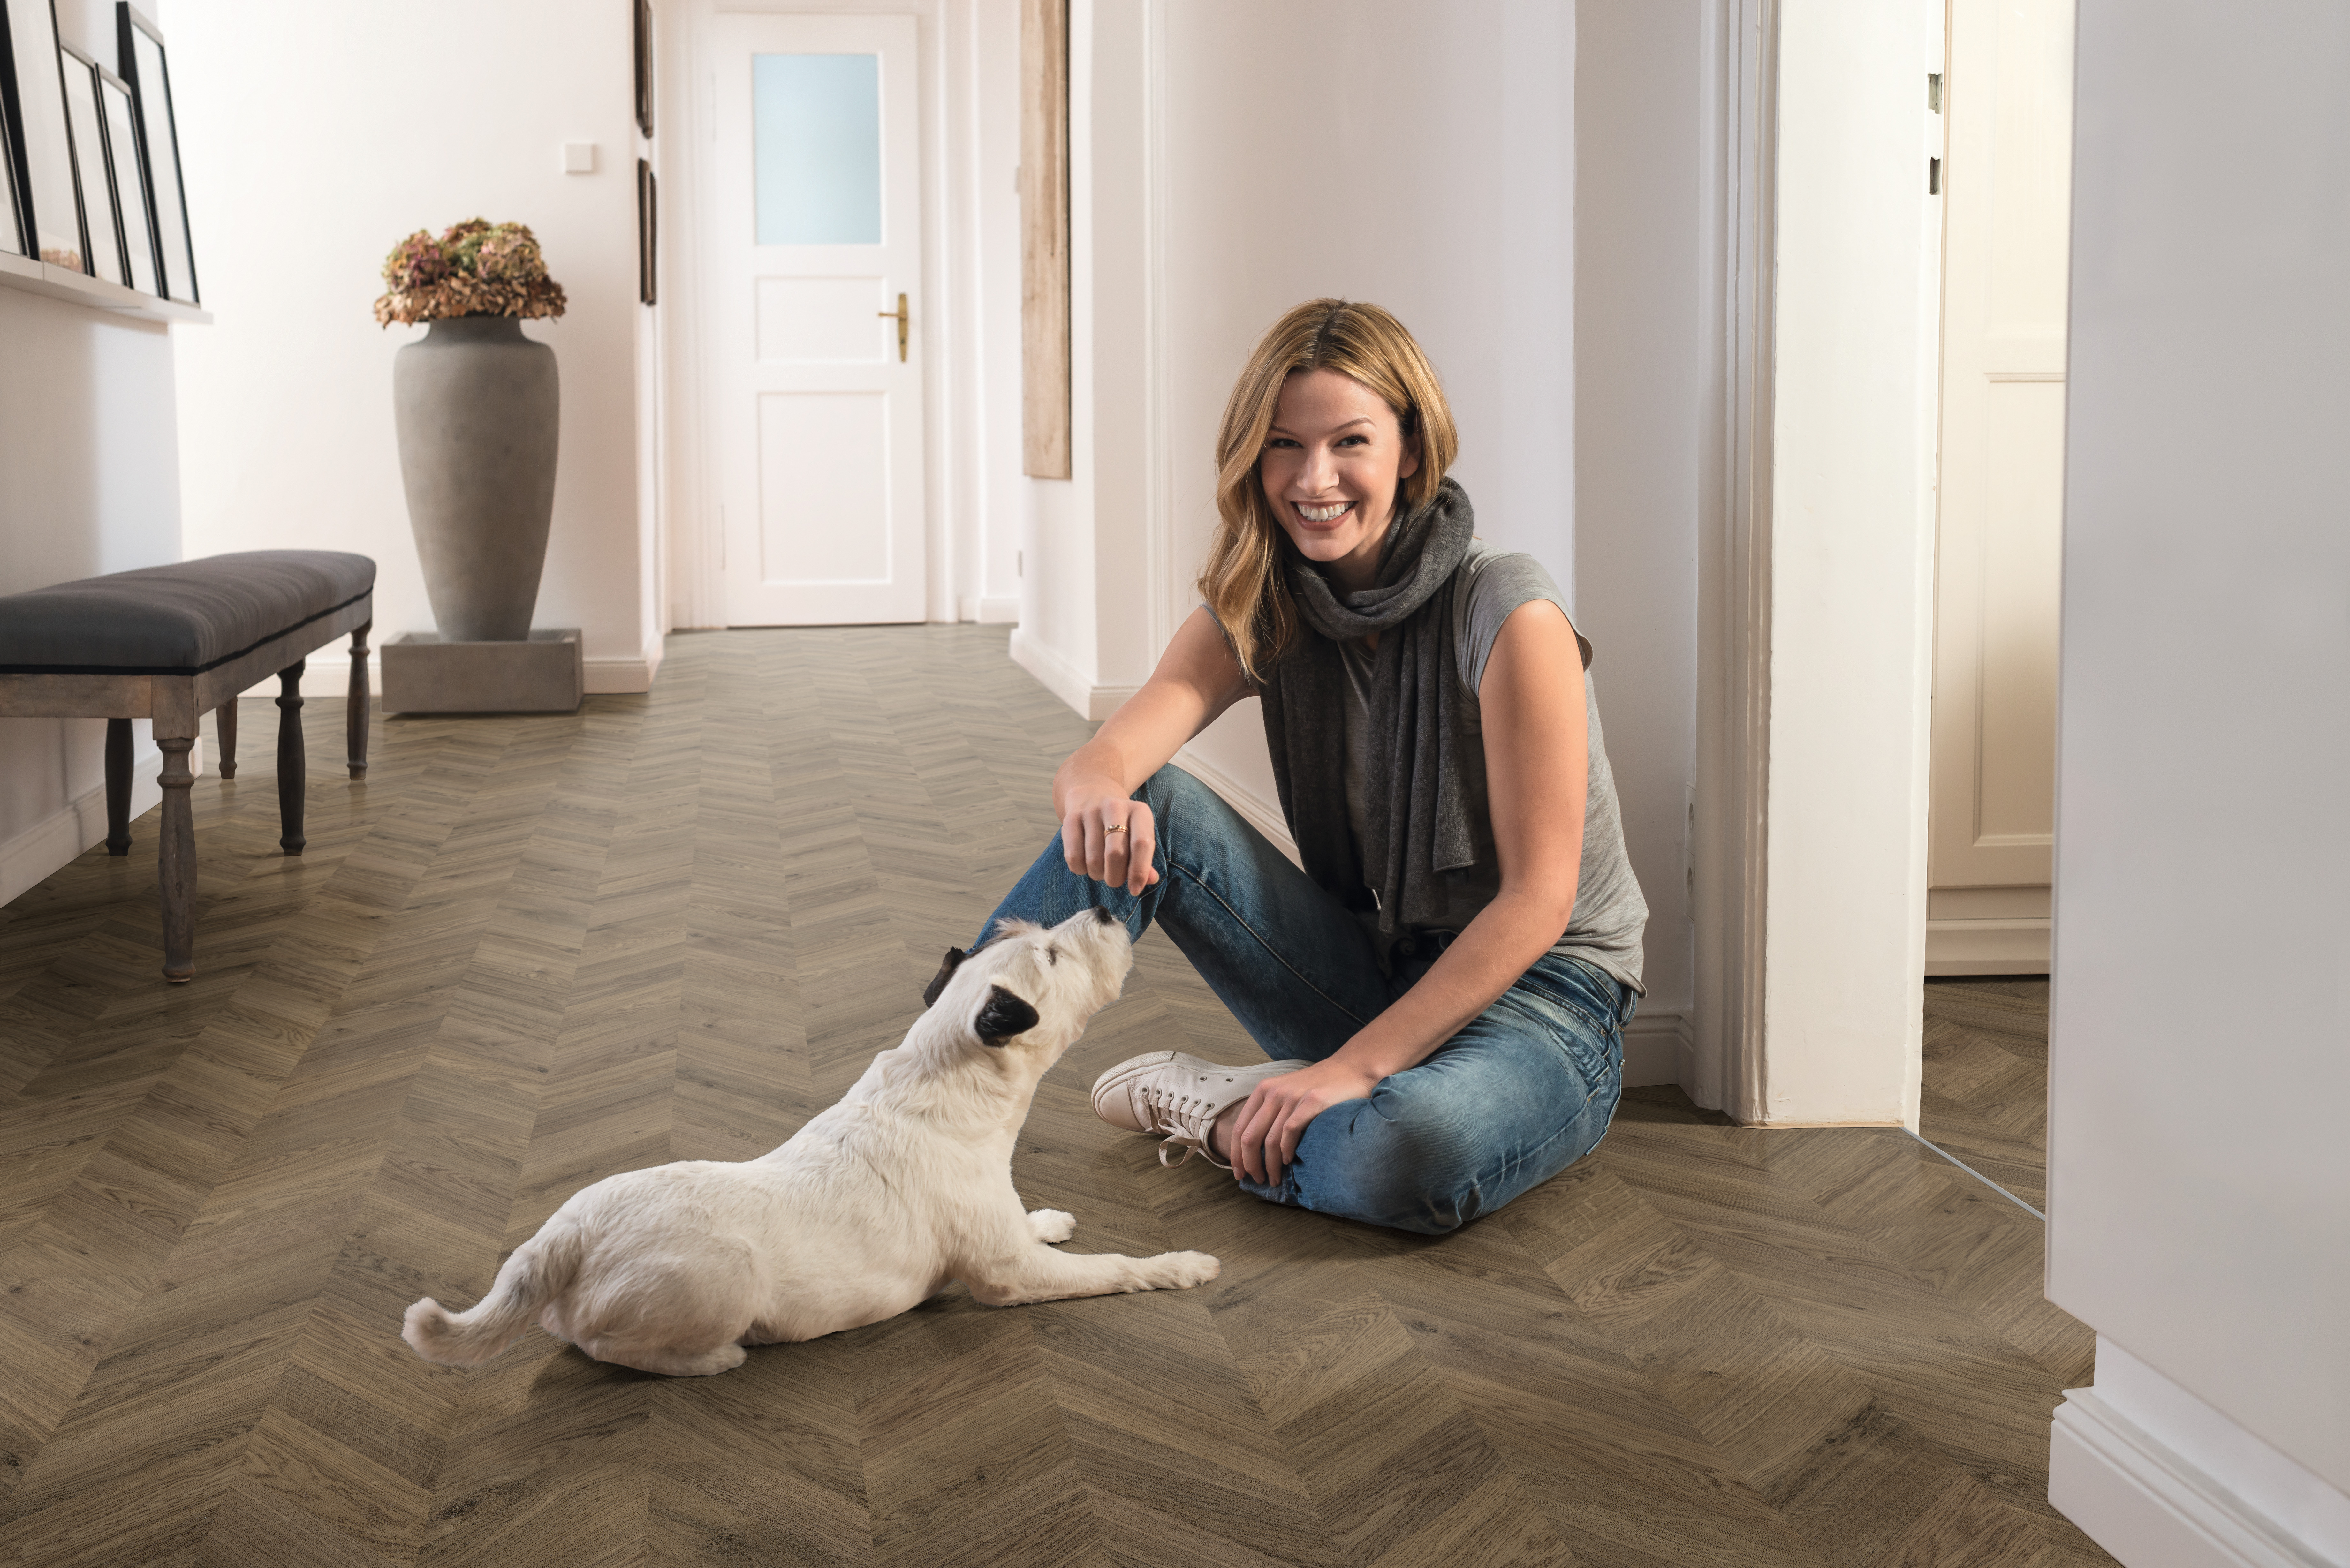 Try out EGGER flooring in the Floor Visualizer